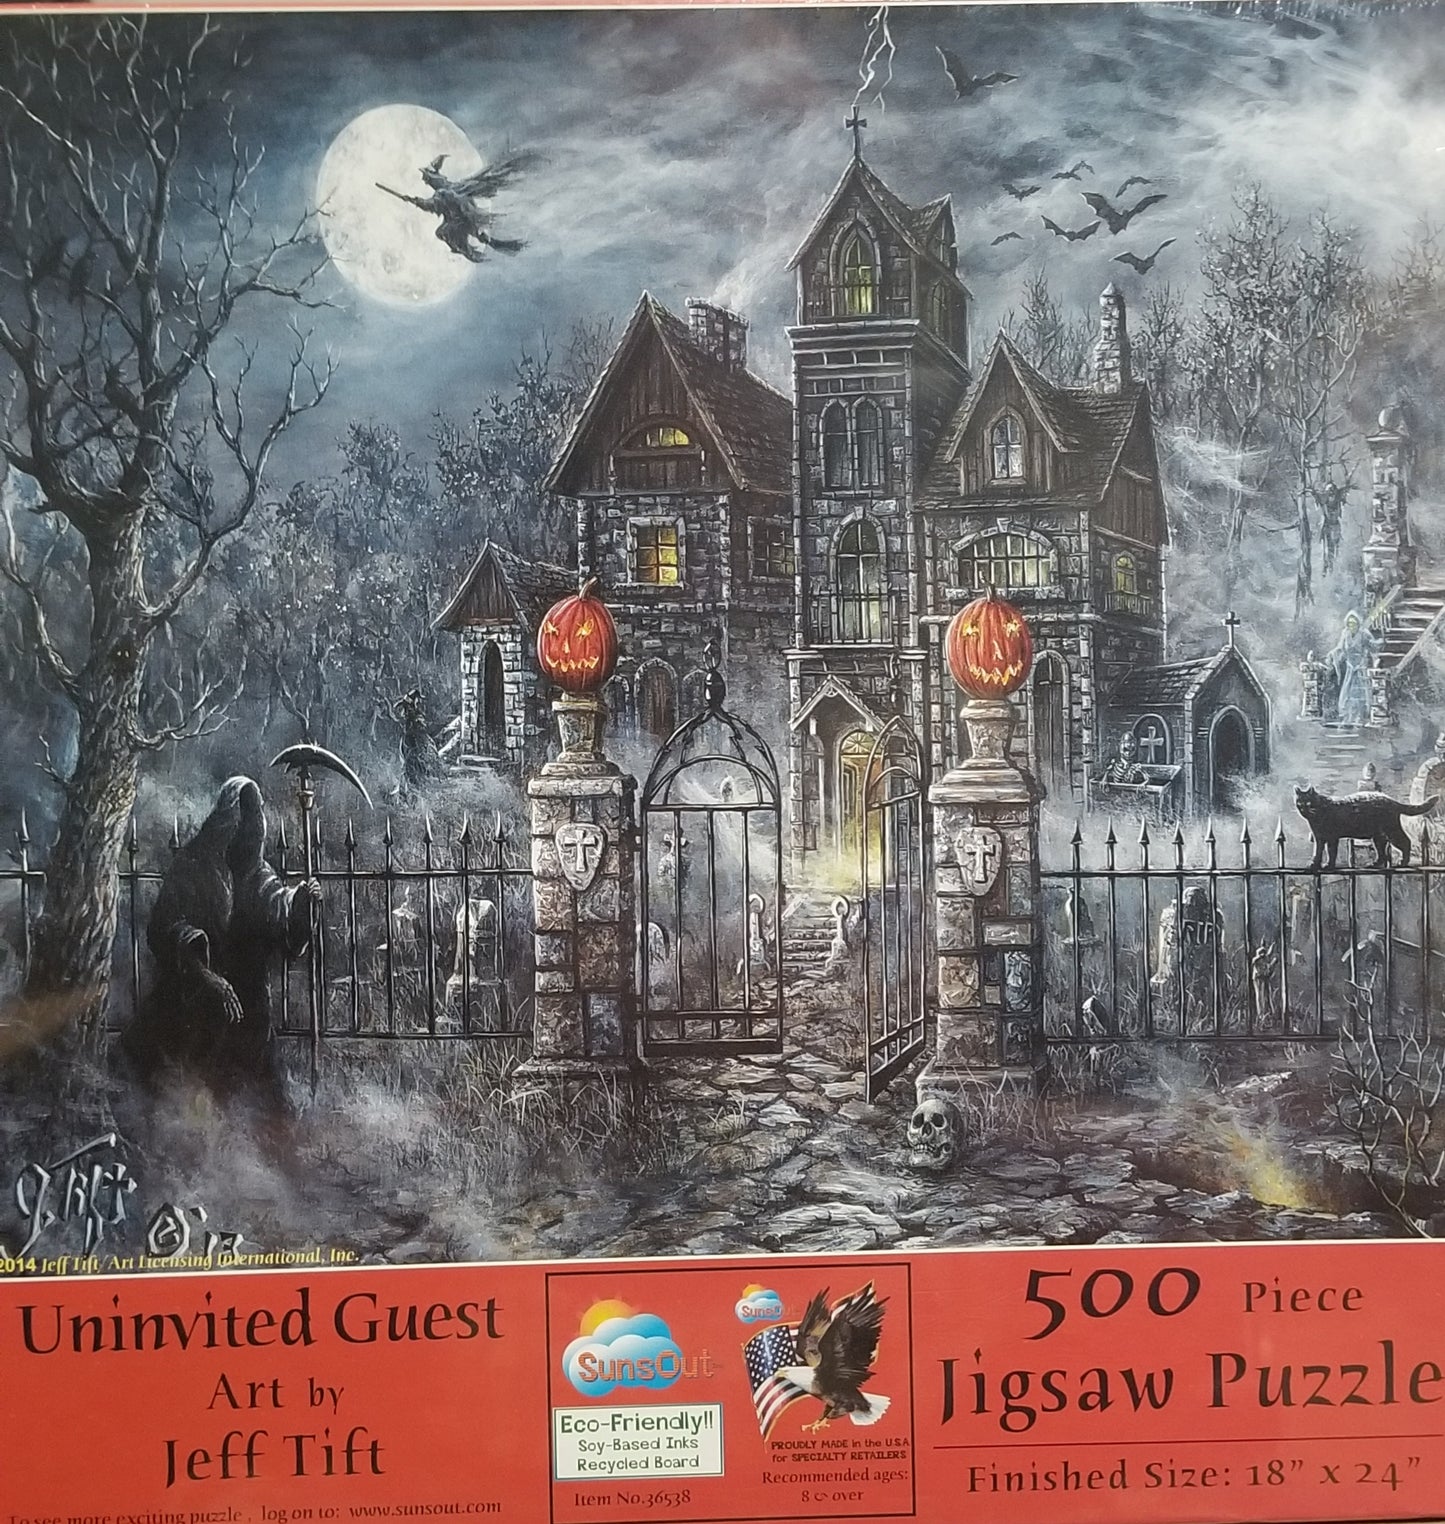 Uninvited Guest by Jeff Tift, 500 Piece Puzzle